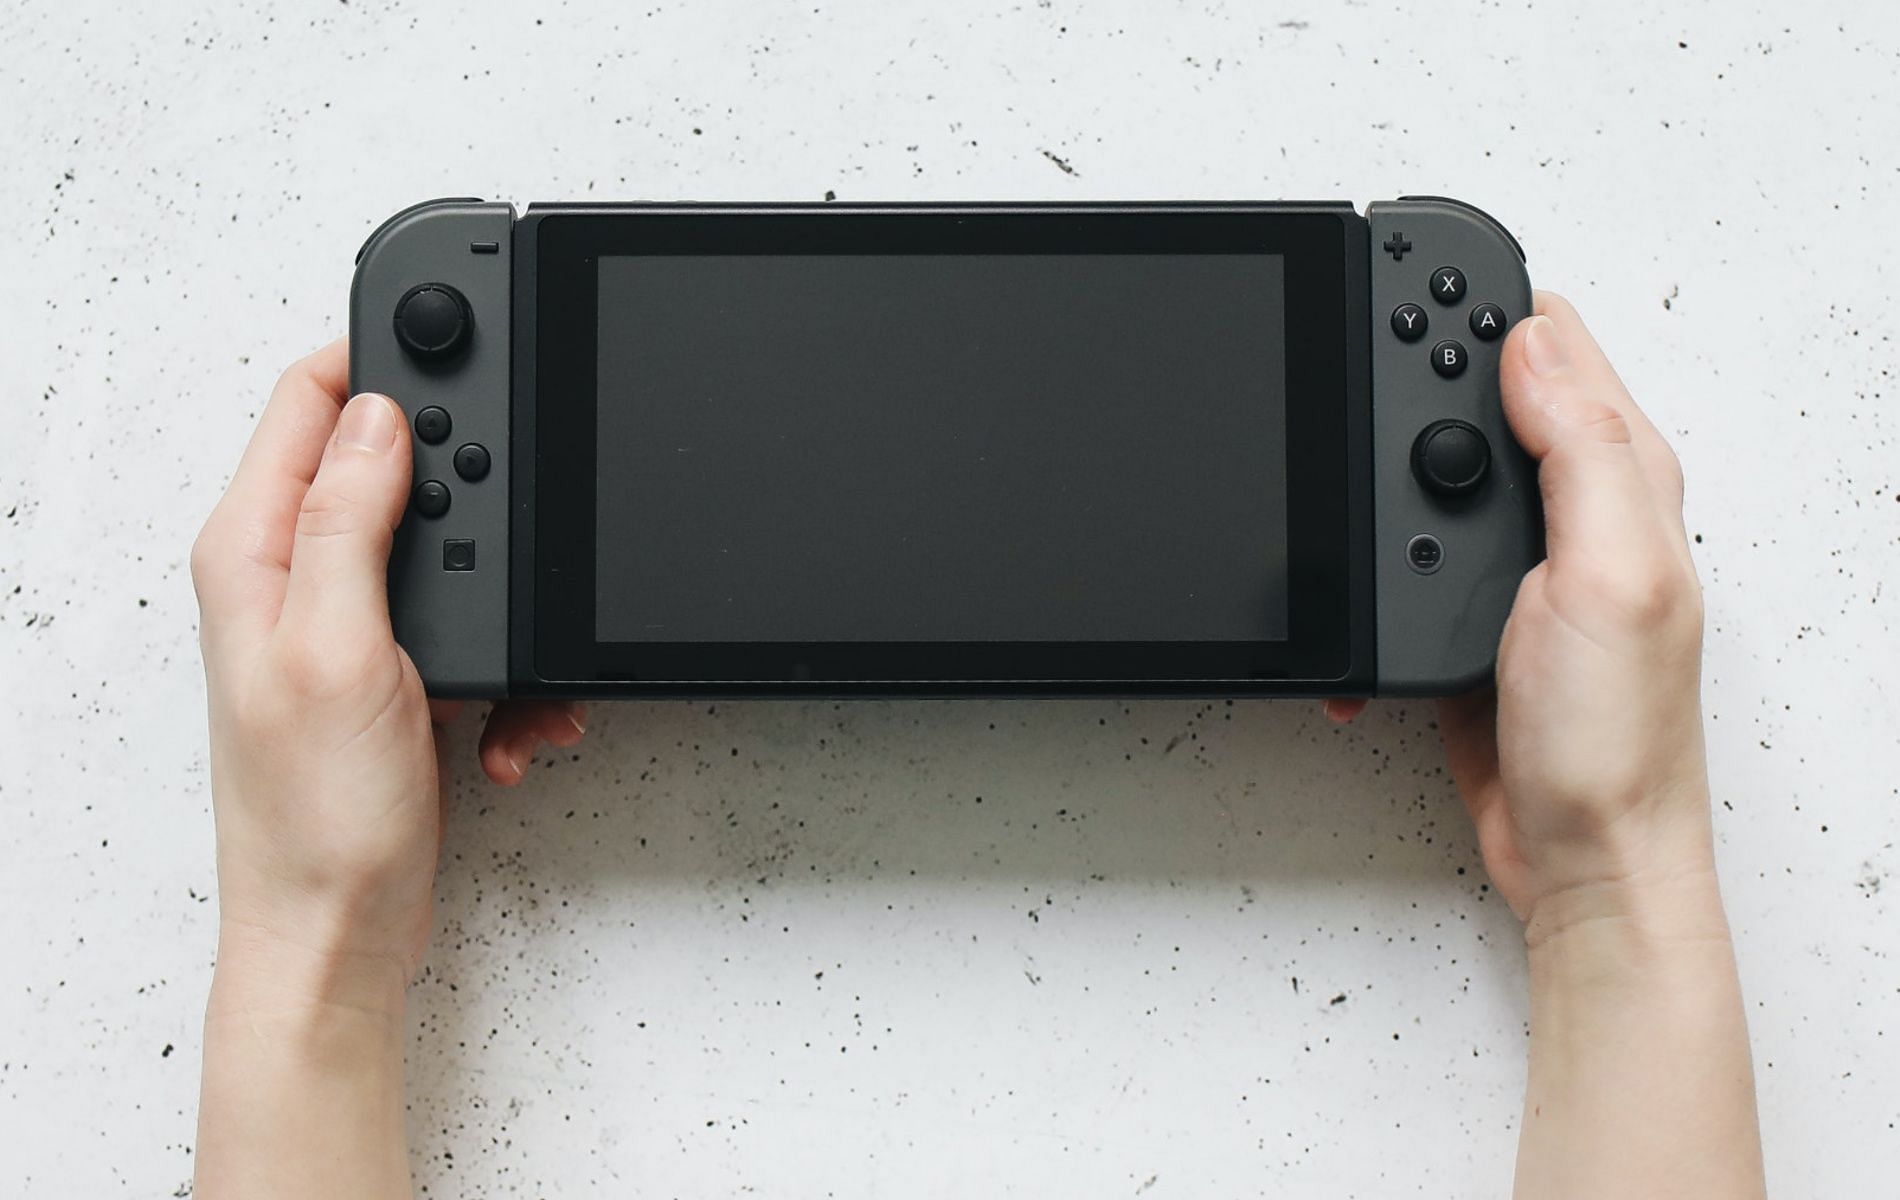 Stock image featuring the Nintendo Switch hybrid console